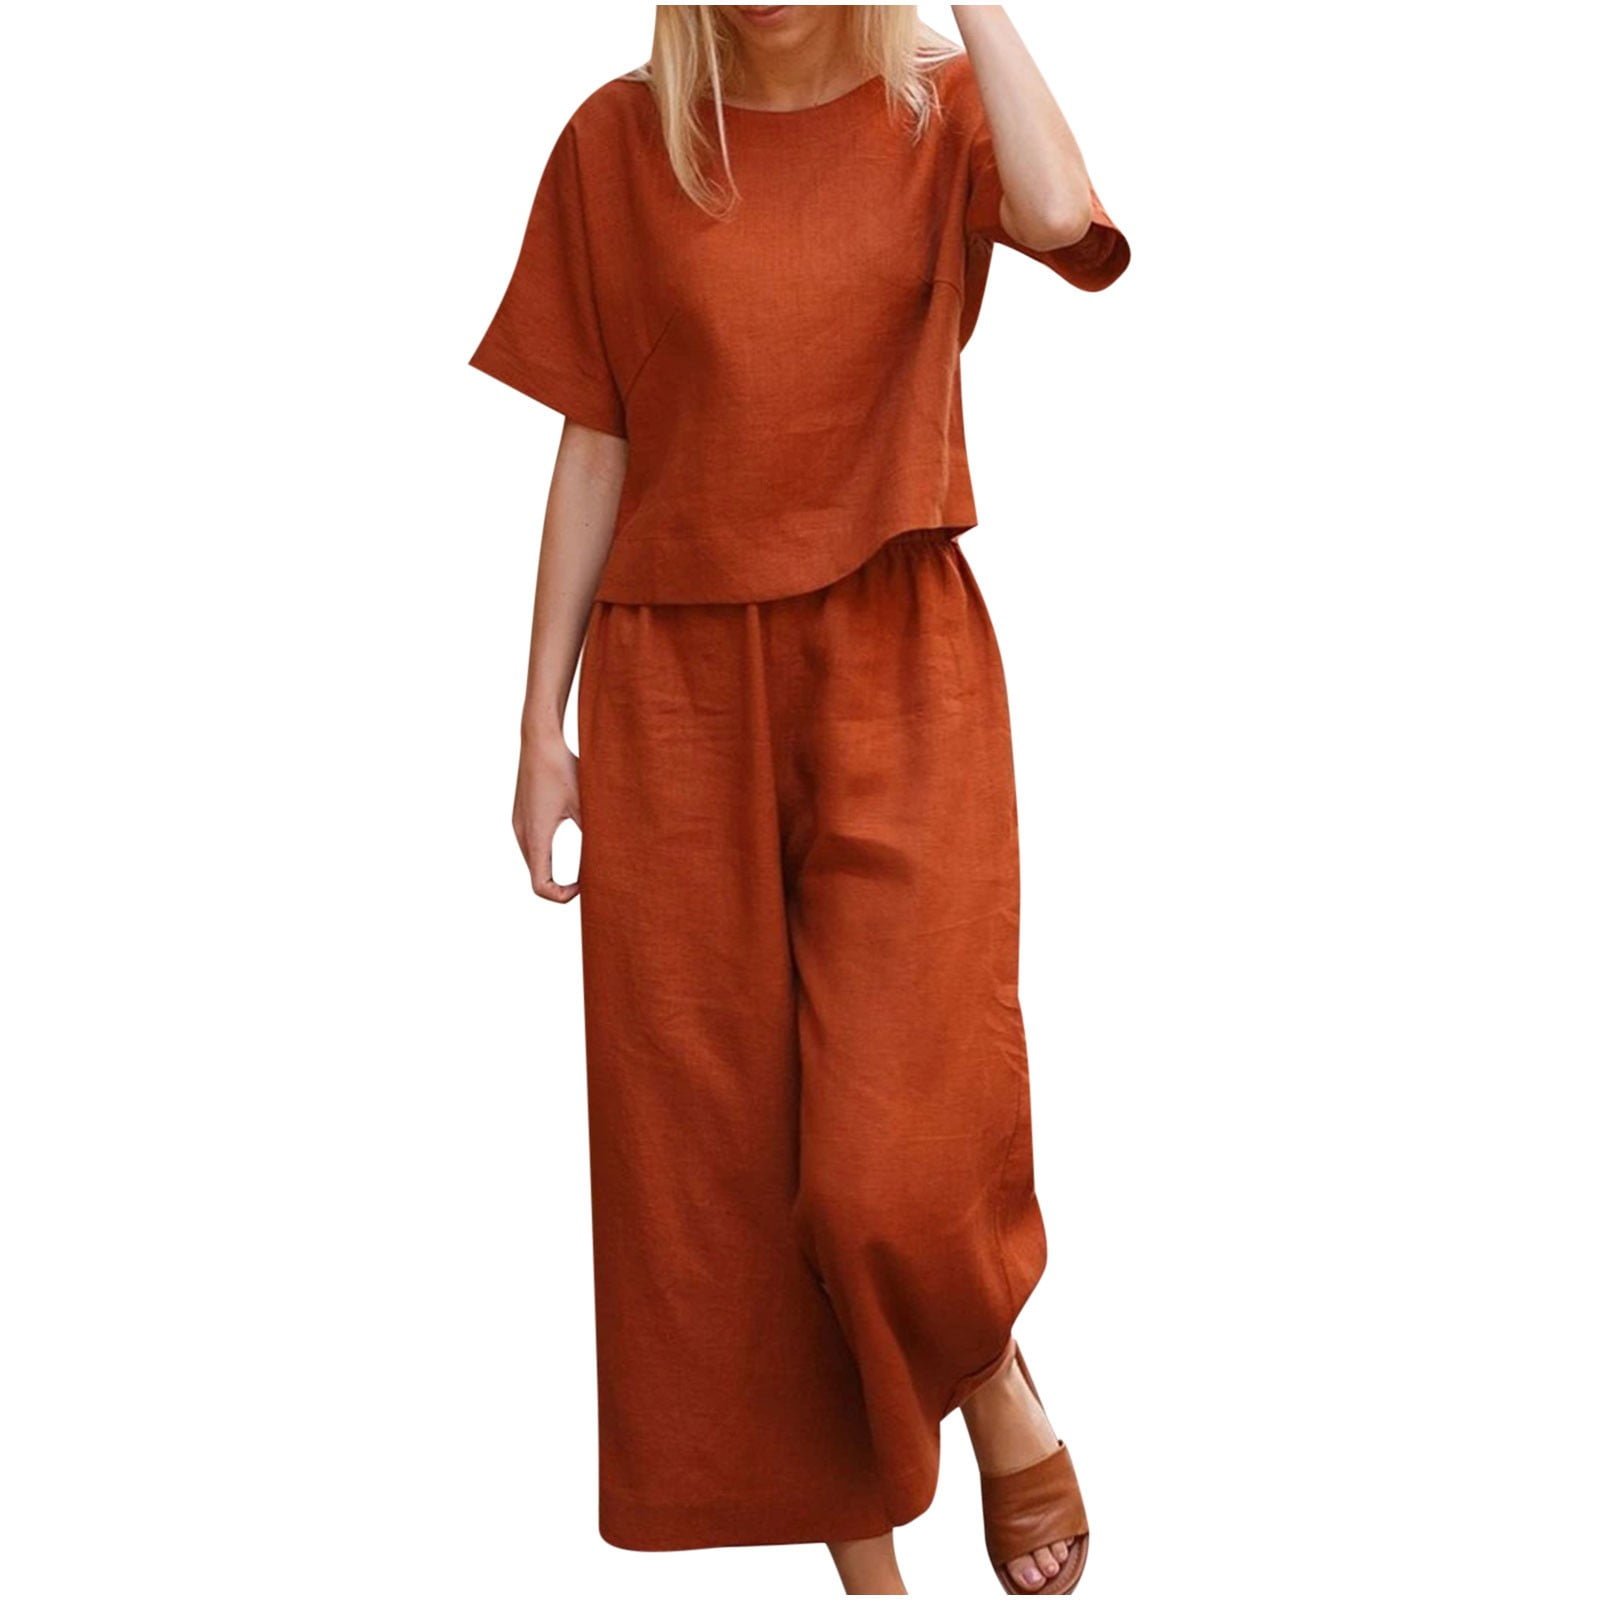 QUYUON Summer 2 Piece Outfits for Women Linen Set Casual